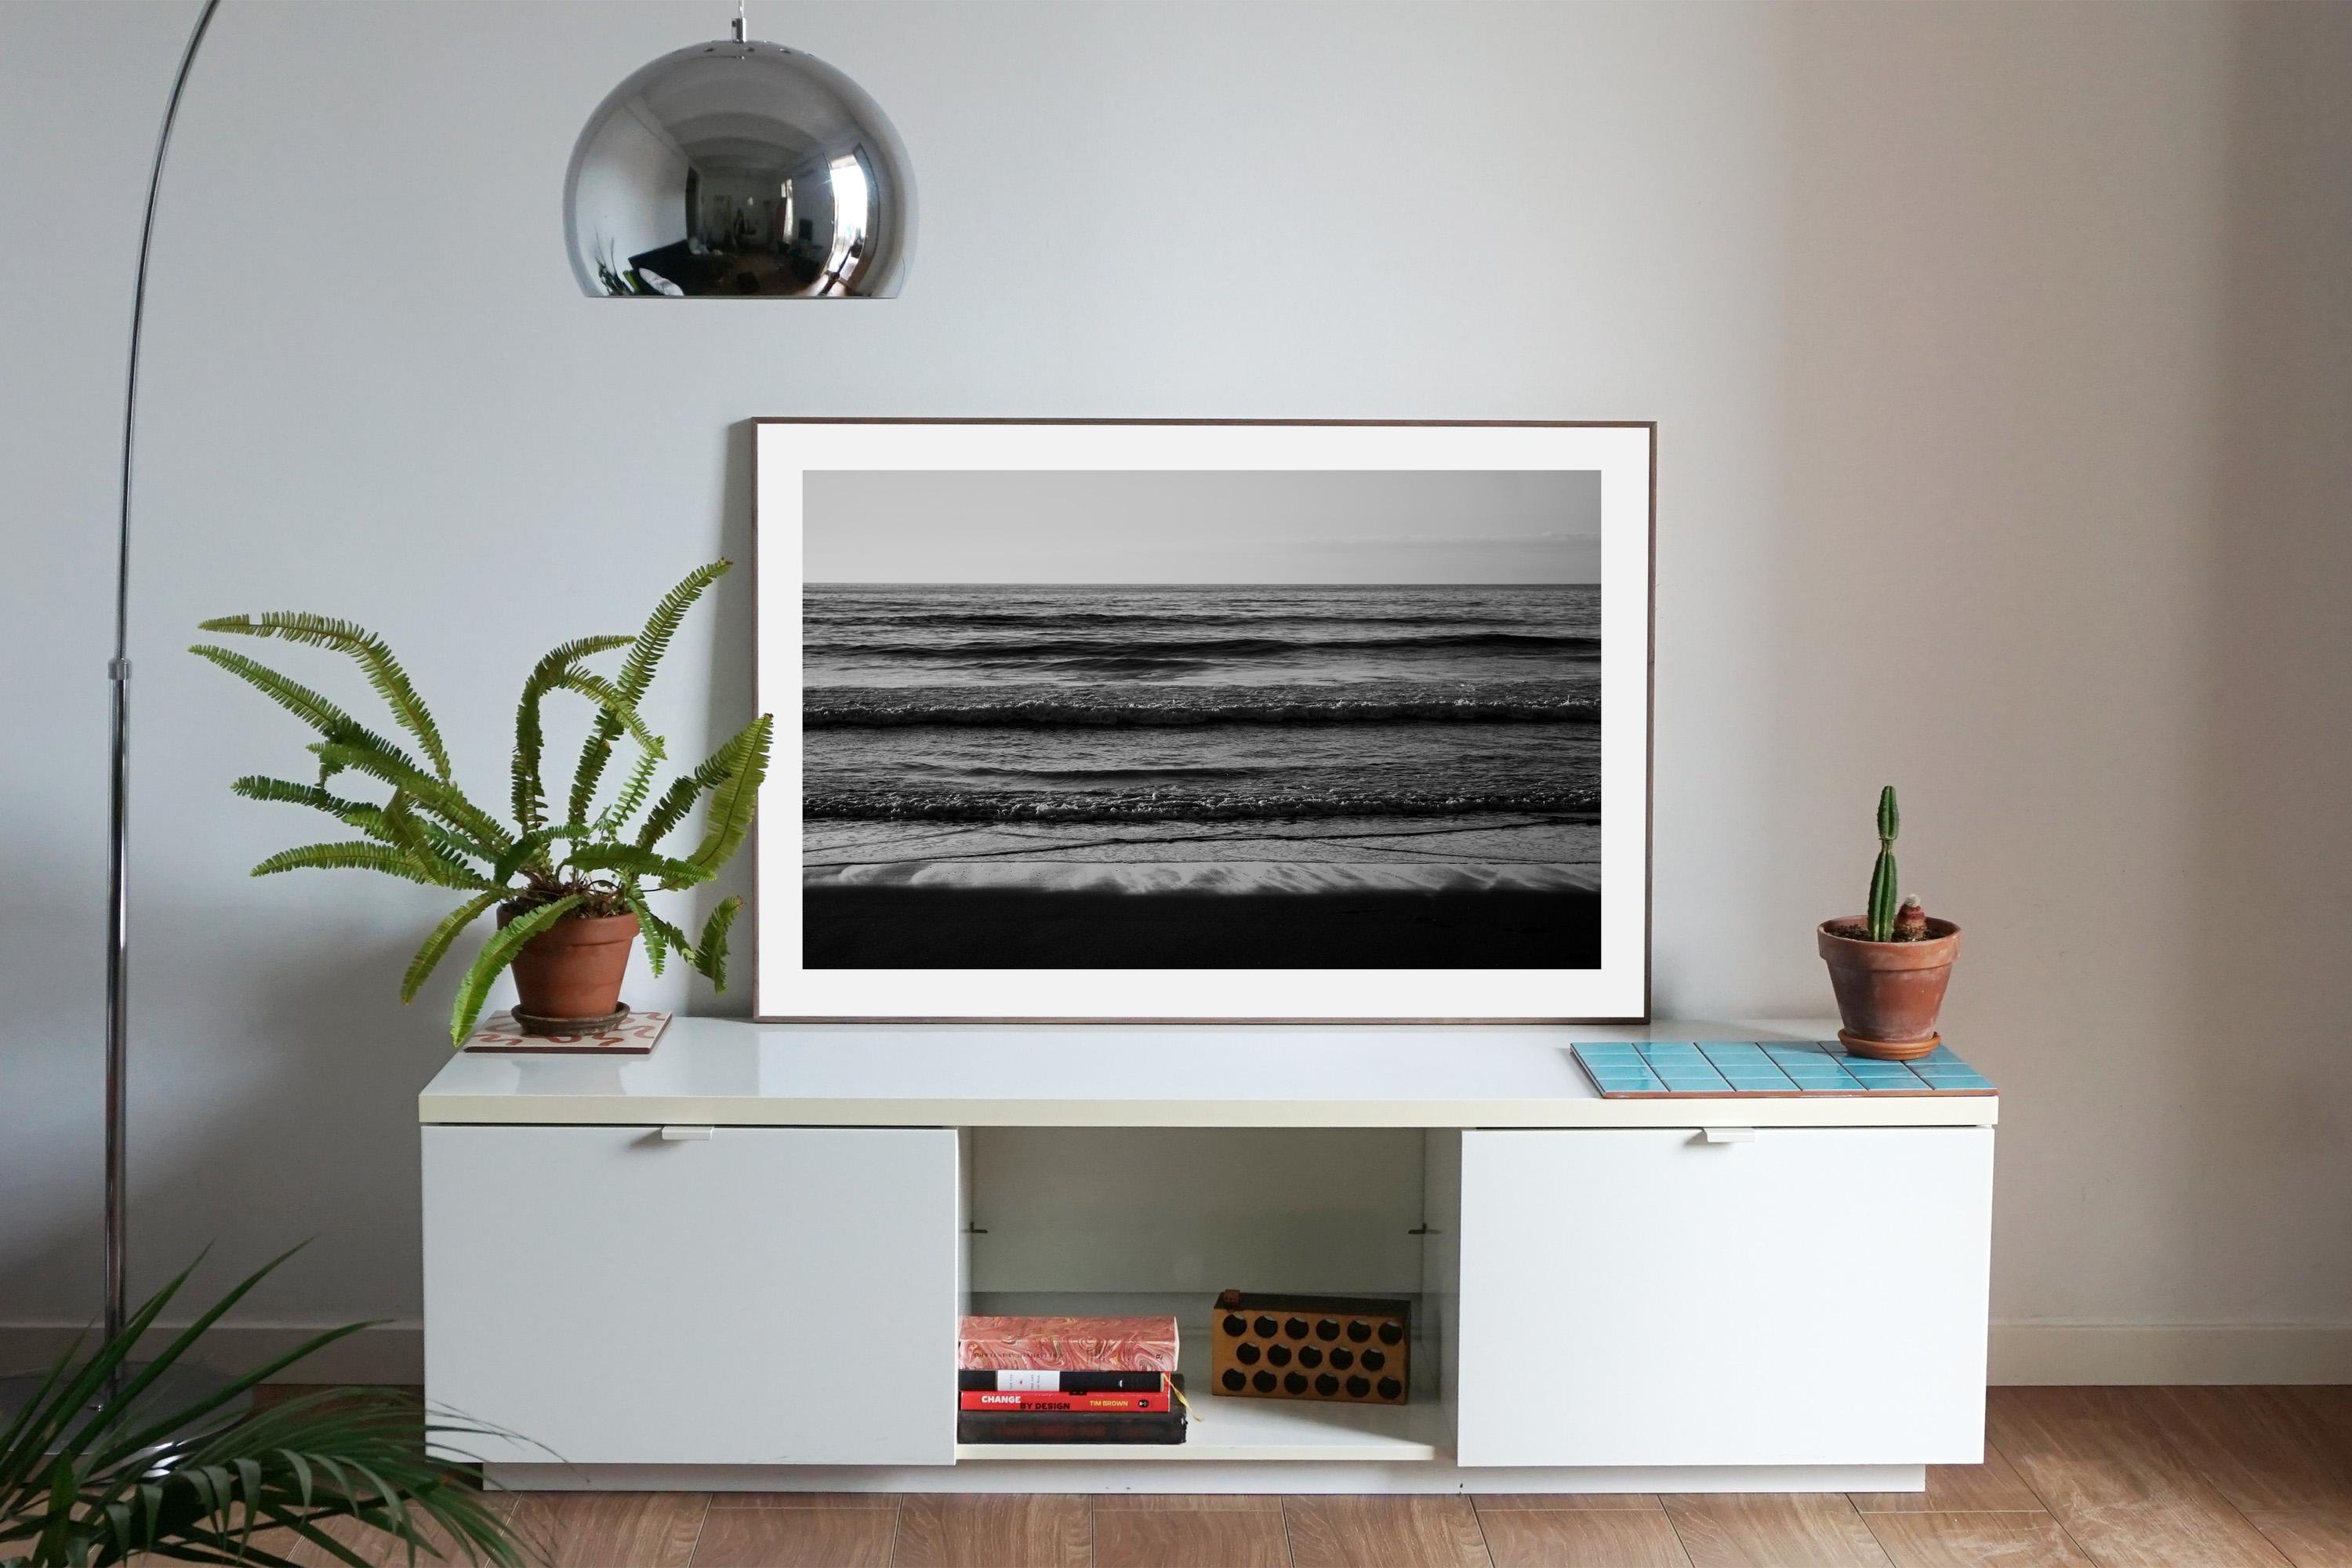 This is an exclusive limited edition black and white Giclée print, on 100% cotton Hahnemühle Photo Rag Fine Art matte paper.

This gorgeous black and white high contrast photograph shows a stunning sunset seascape beach horizon in a Pacific